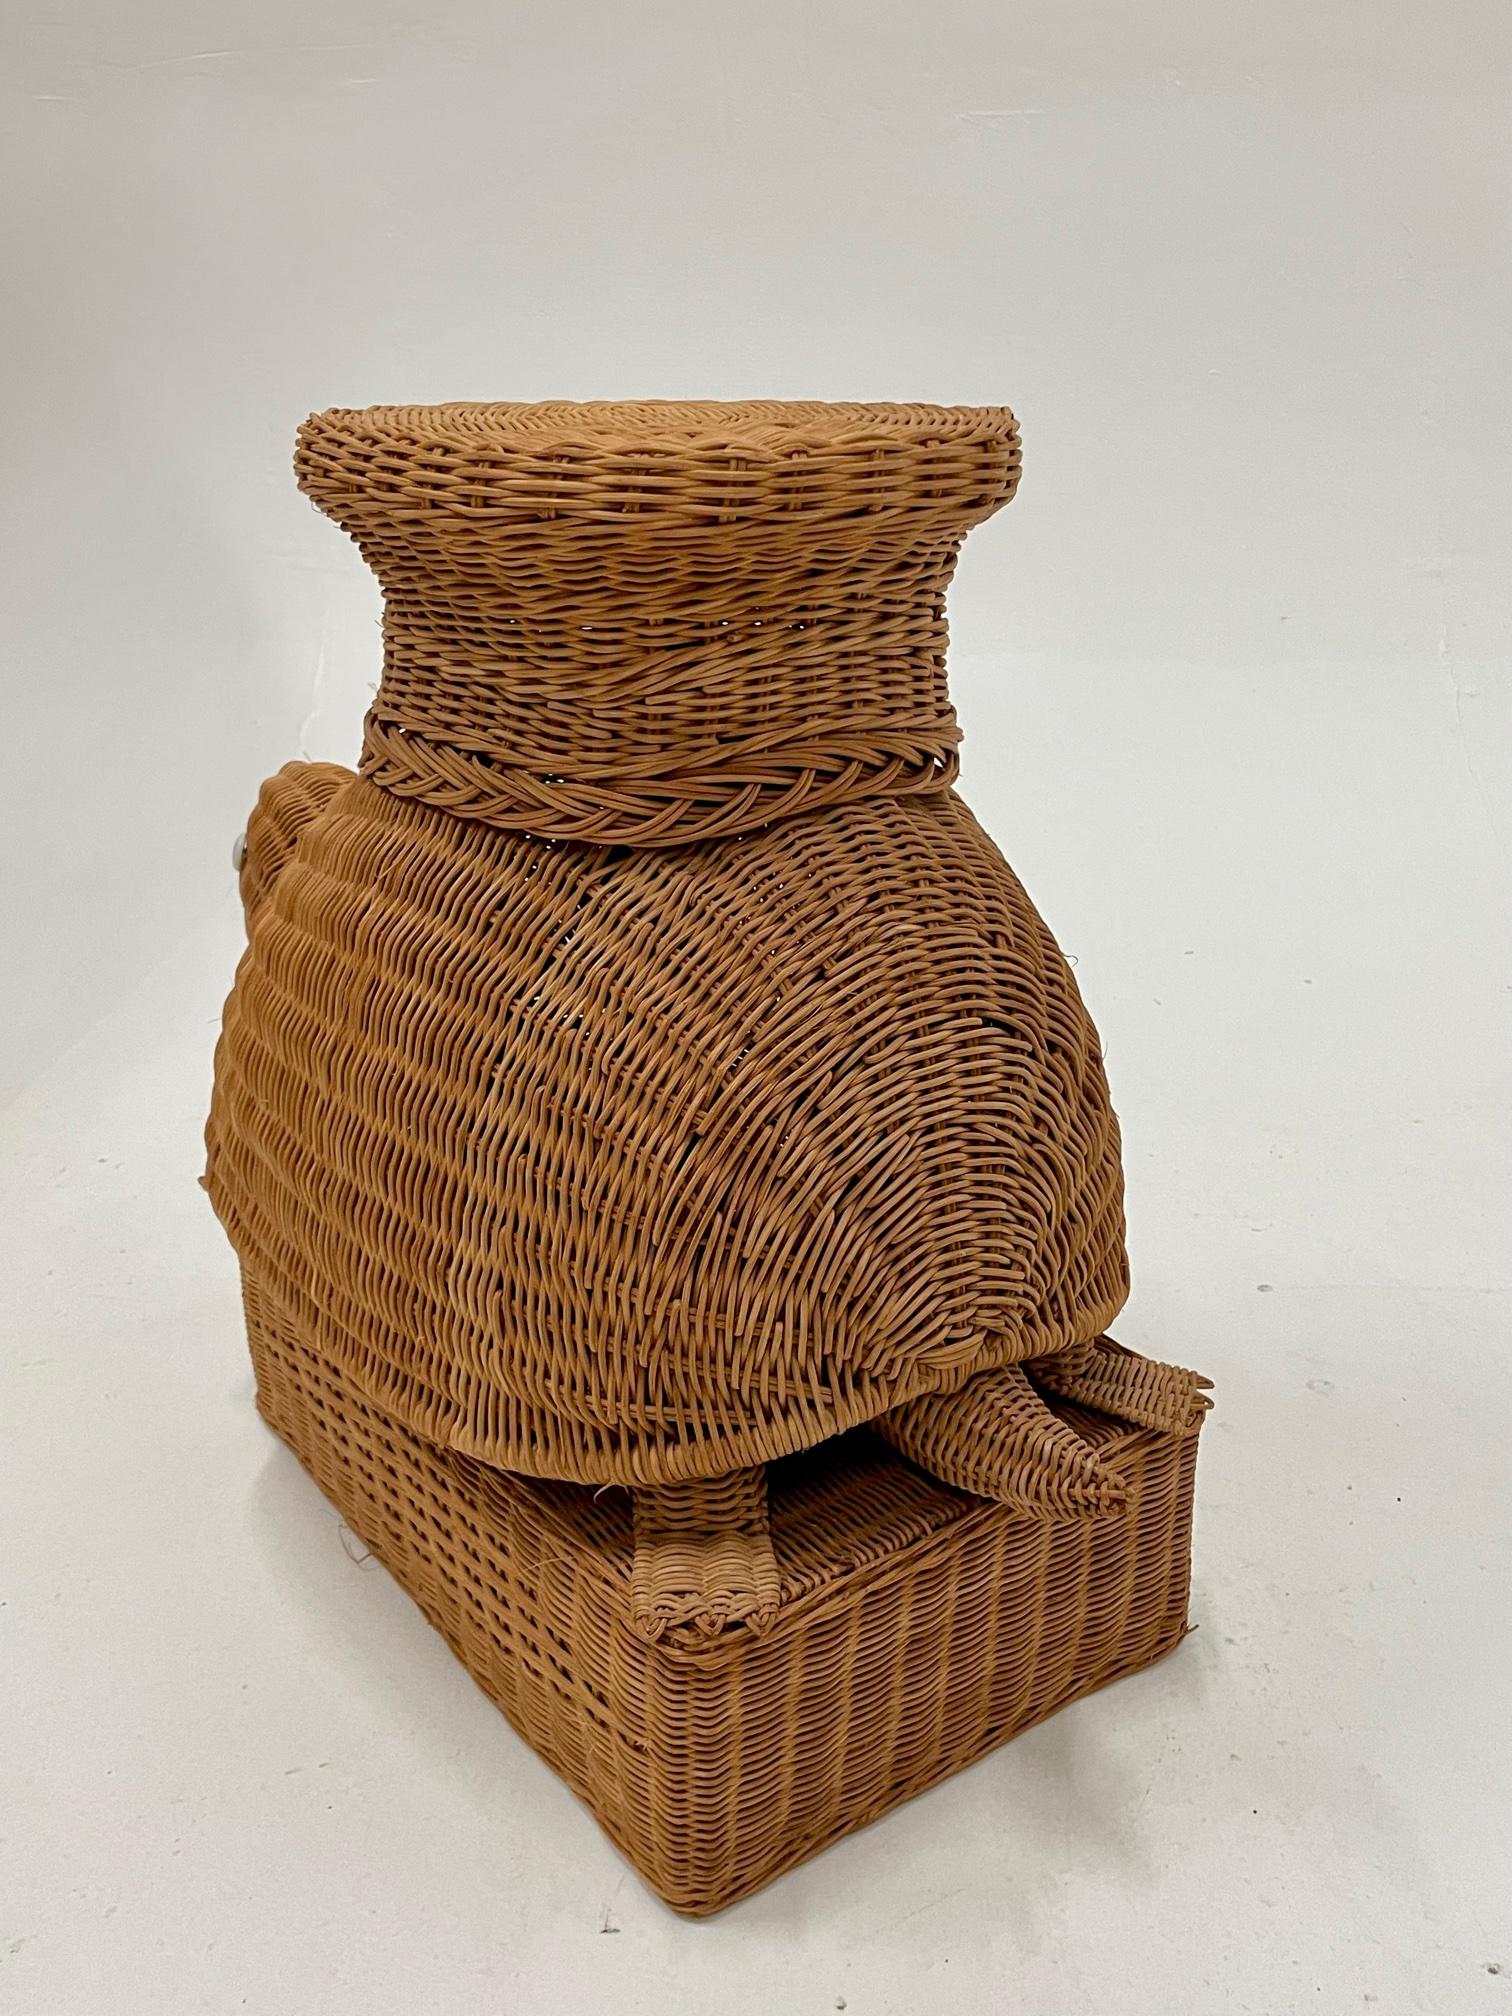 Show stealing adorable woven wicker end table in the shape of a frowning turtle.
Surface top 11 x 10.